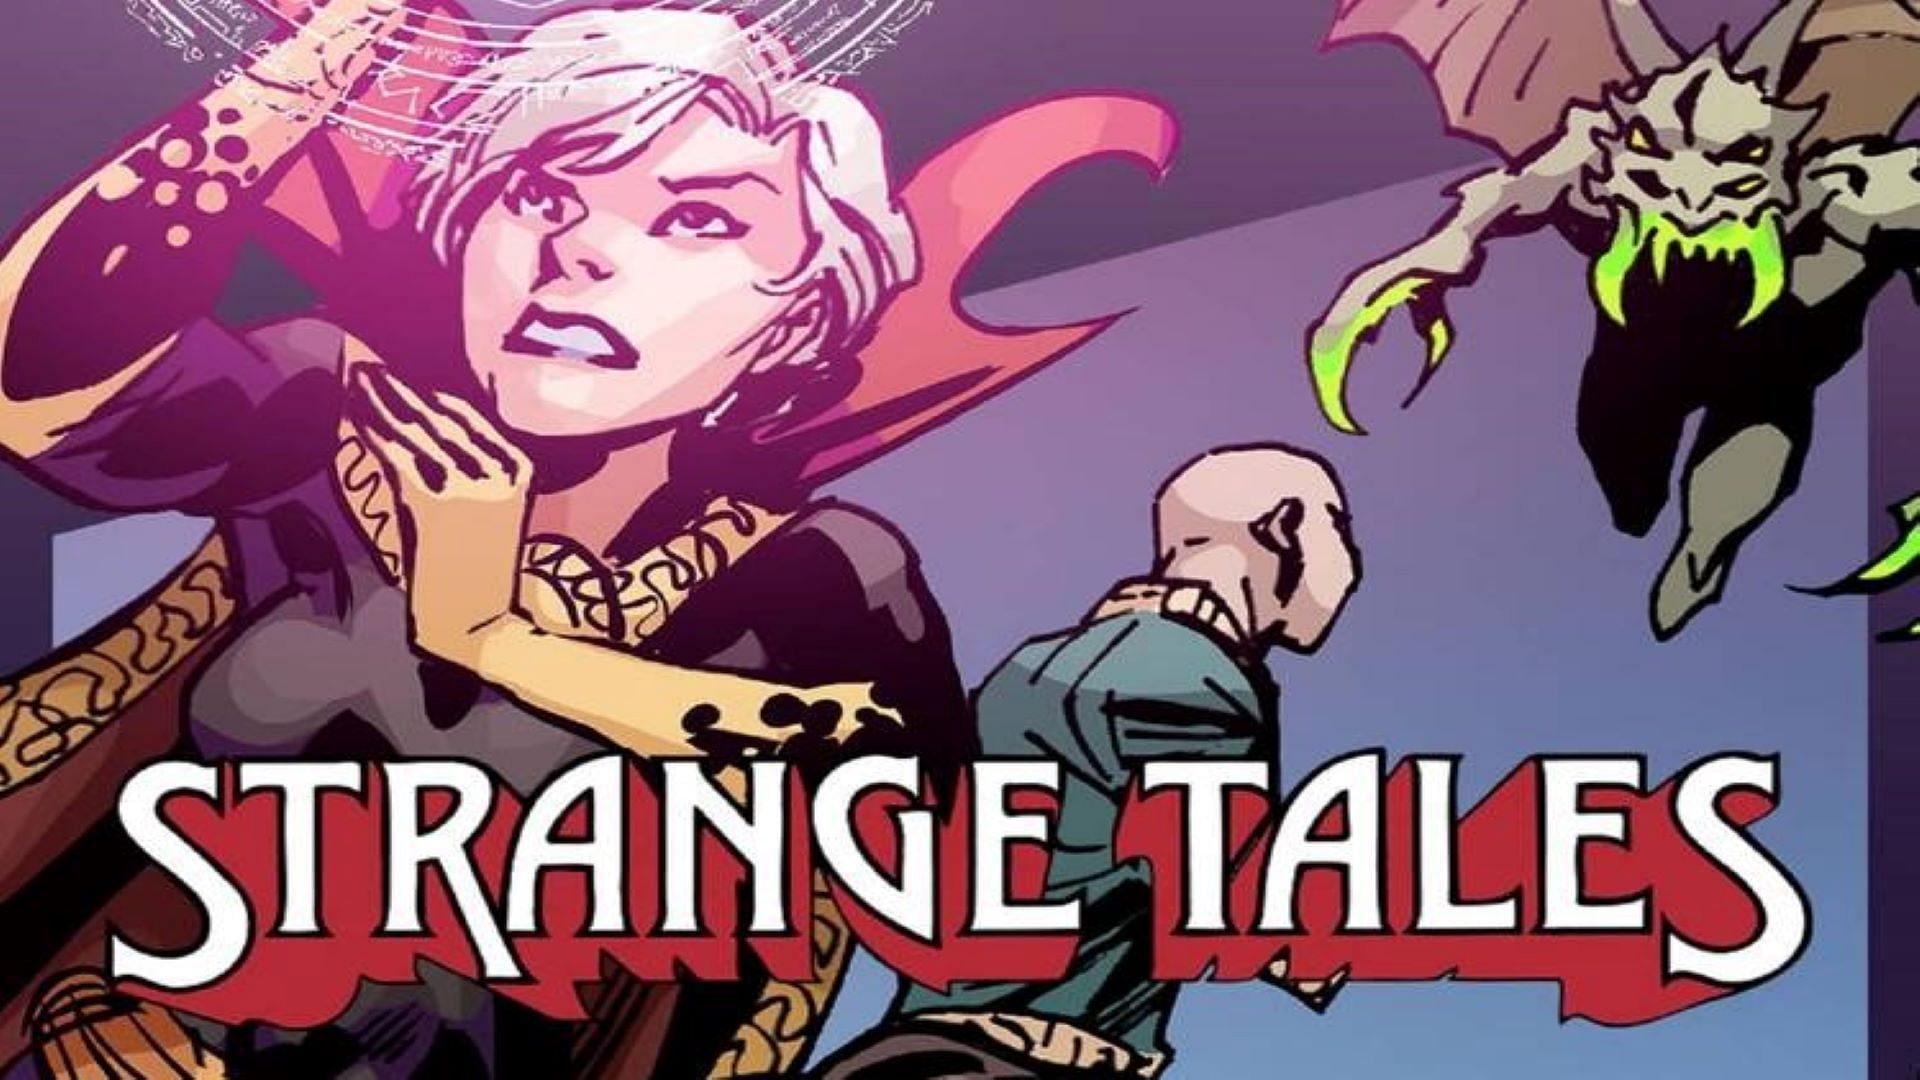 America Chavez, Clea and Wong gets featured in Strange Tales (Image via Marvel)